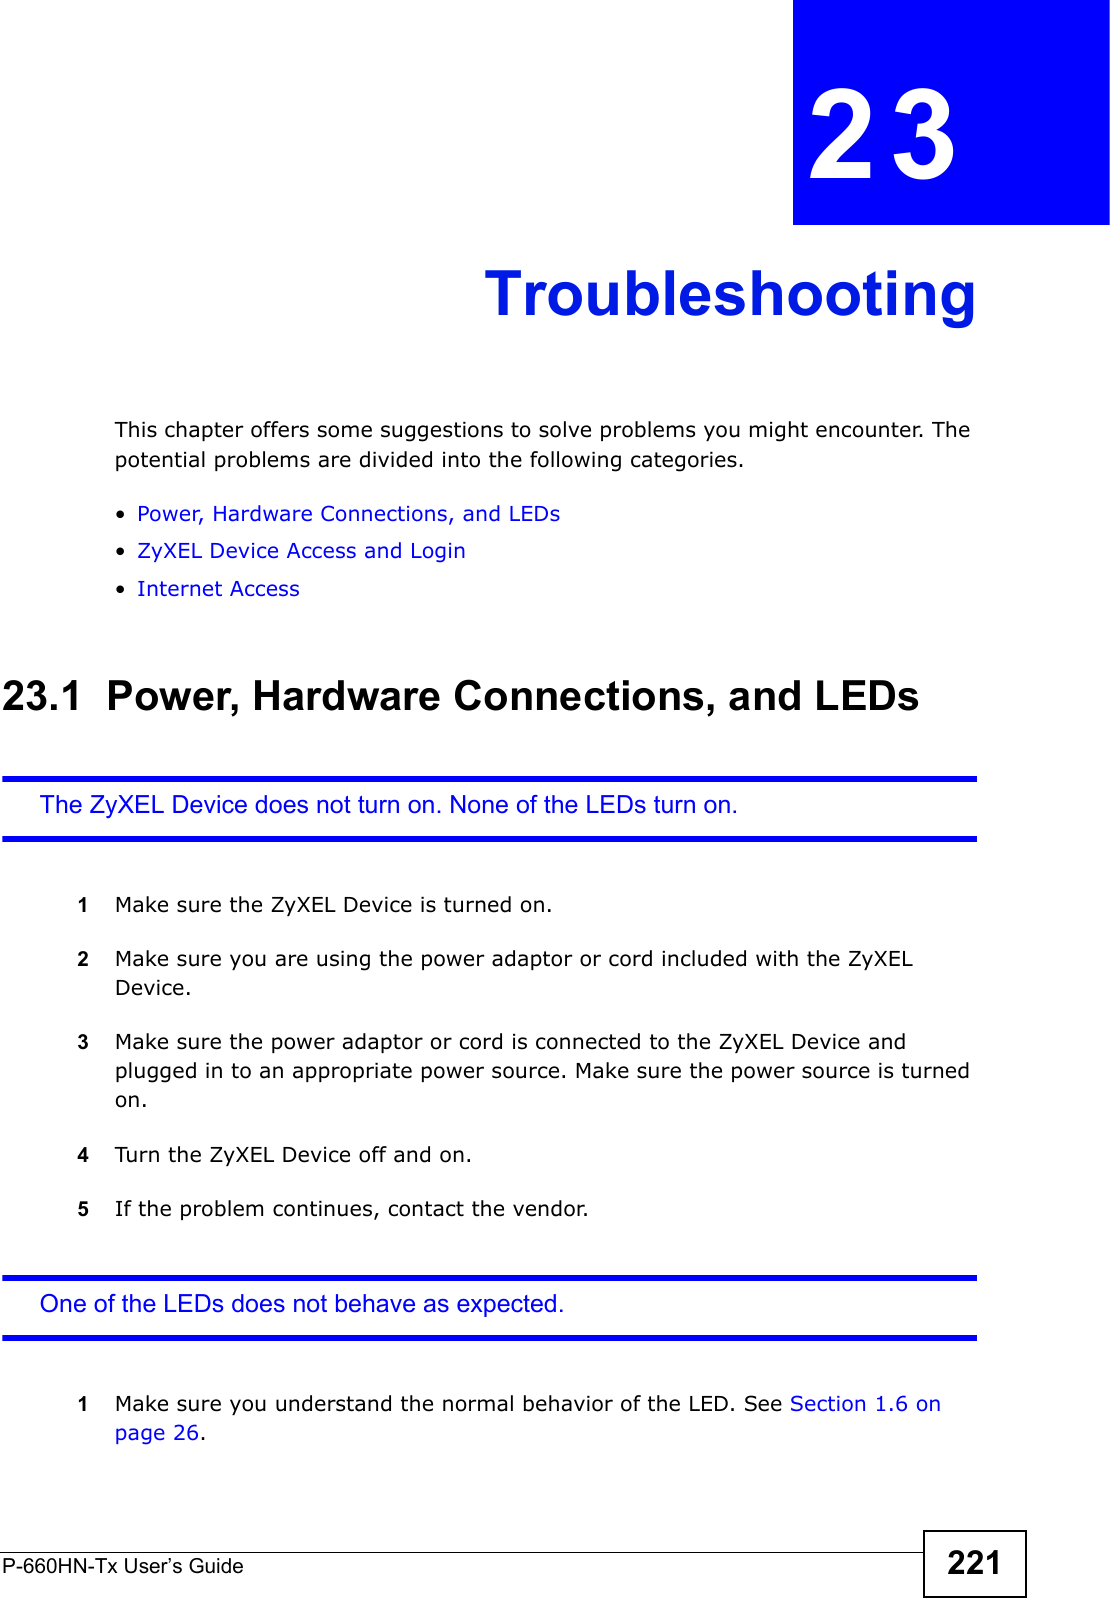 P-660HN-Tx User’s Guide 221CHAPTER  23 TroubleshootingThis chapter offers some suggestions to solve problems you might encounter. The potential problems are divided into the following categories. •Power, Hardware Connections, and LEDs•ZyXEL Device Access and Login•Internet Access23.1  Power, Hardware Connections, and LEDsThe ZyXEL Device does not turn on. None of the LEDs turn on.1Make sure the ZyXEL Device is turned on. 2Make sure you are using the power adaptor or cord included with the ZyXEL Device.3Make sure the power adaptor or cord is connected to the ZyXEL Device and plugged in to an appropriate power source. Make sure the power source is turned on.4Turn the ZyXEL Device off and on.5If the problem continues, contact the vendor.One of the LEDs does not behave as expected.1Make sure you understand the normal behavior of the LED. See Section 1.6 on page 26.